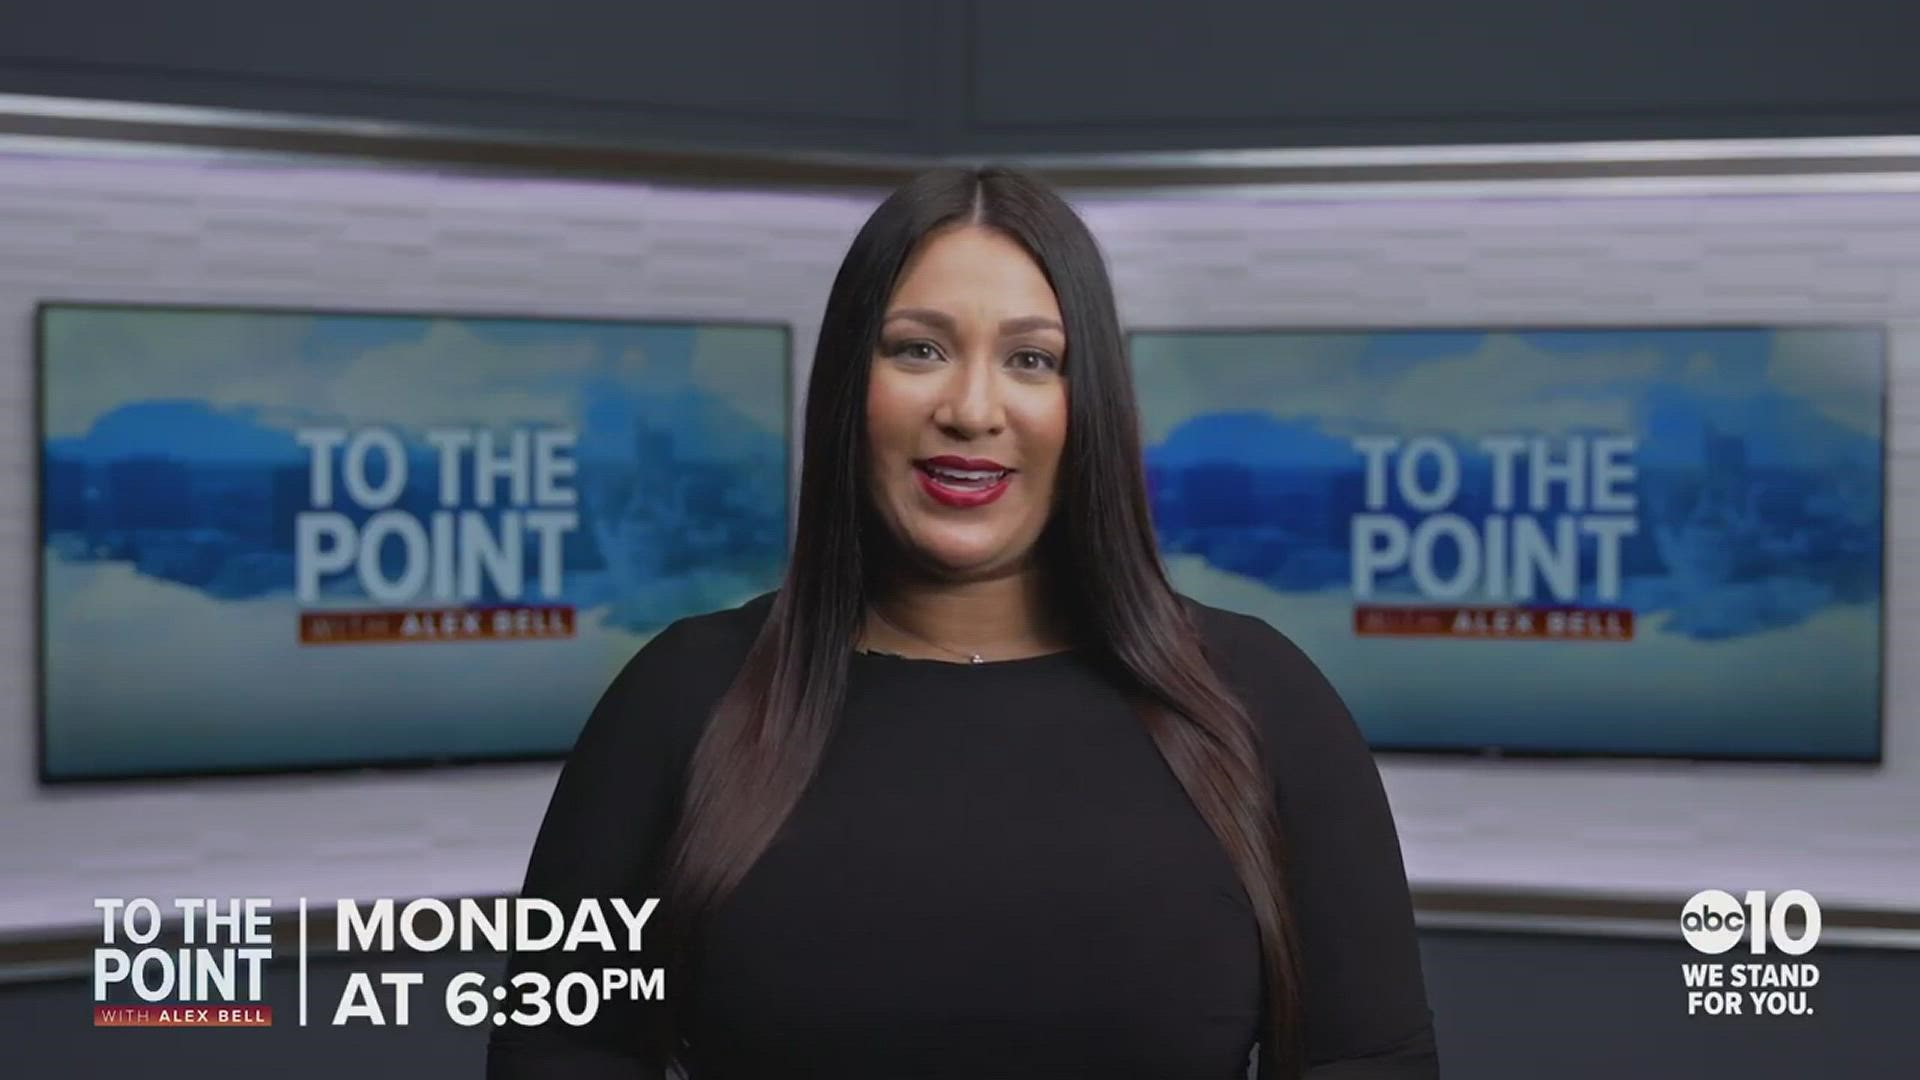 Watch "To the Point with Alex Bell" weeknights at 6:30 on ABC10.